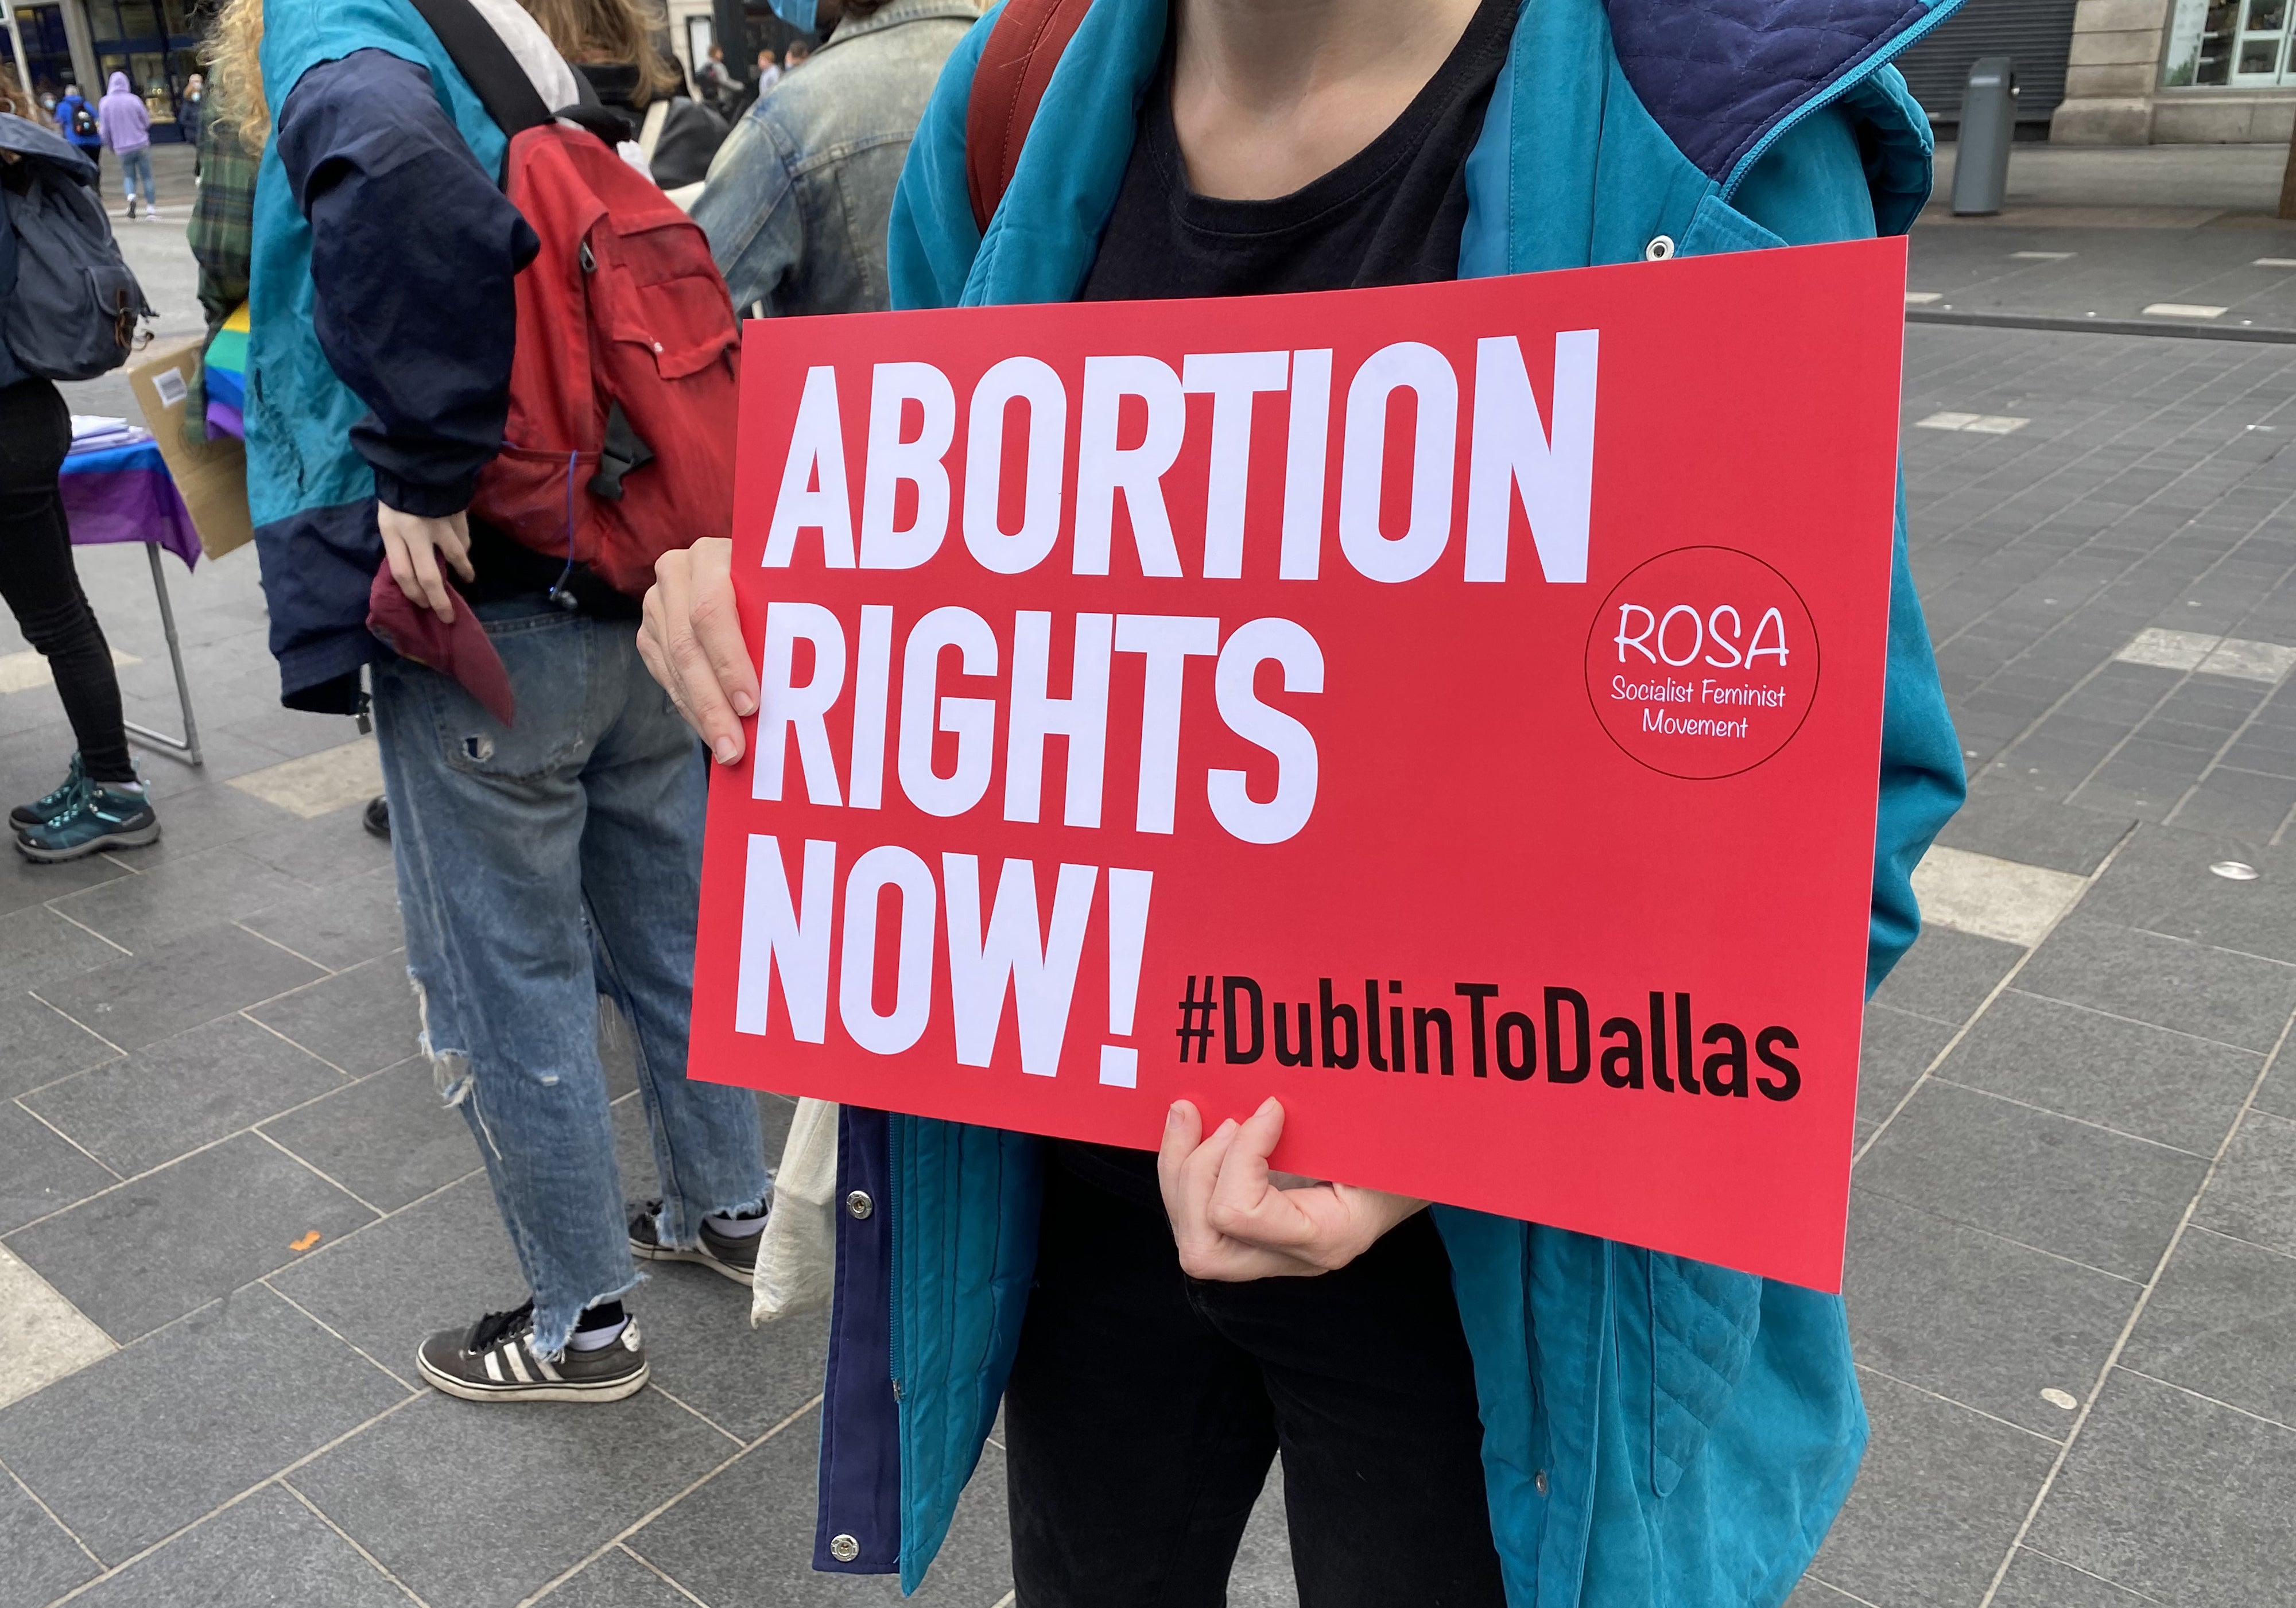 Despite abortion being legalised in 2018, many Irish women and girls are still having to travel to the UK for terminations